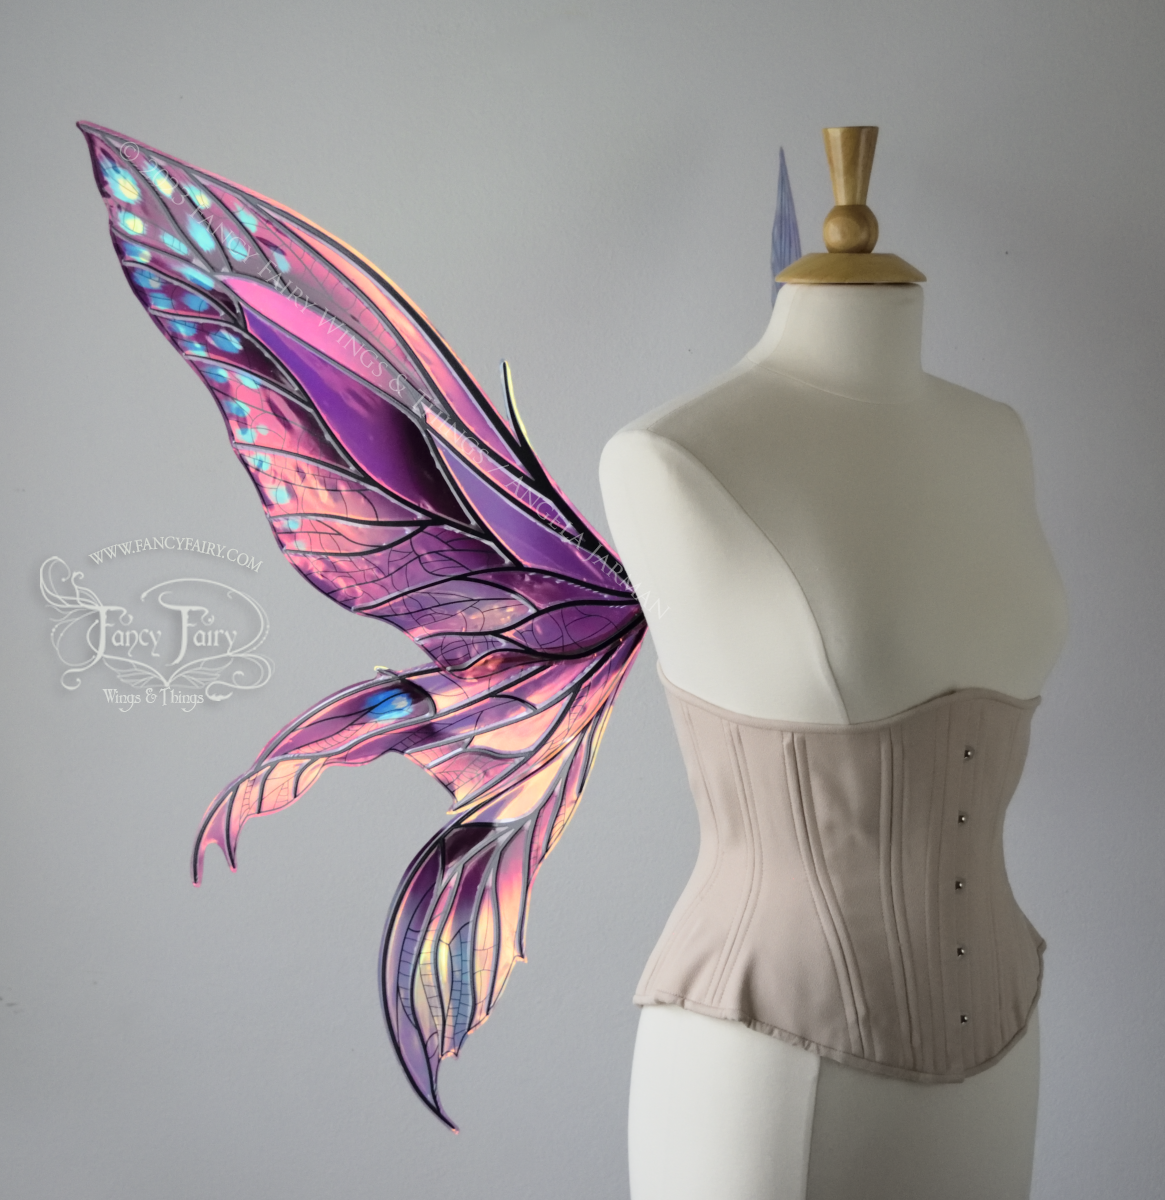 Left 3/4 view of large burgundy and peach pink iridescent fairy wings with 3 panels on each side, pointed tips, lots of vein detail, worn on a dress form.